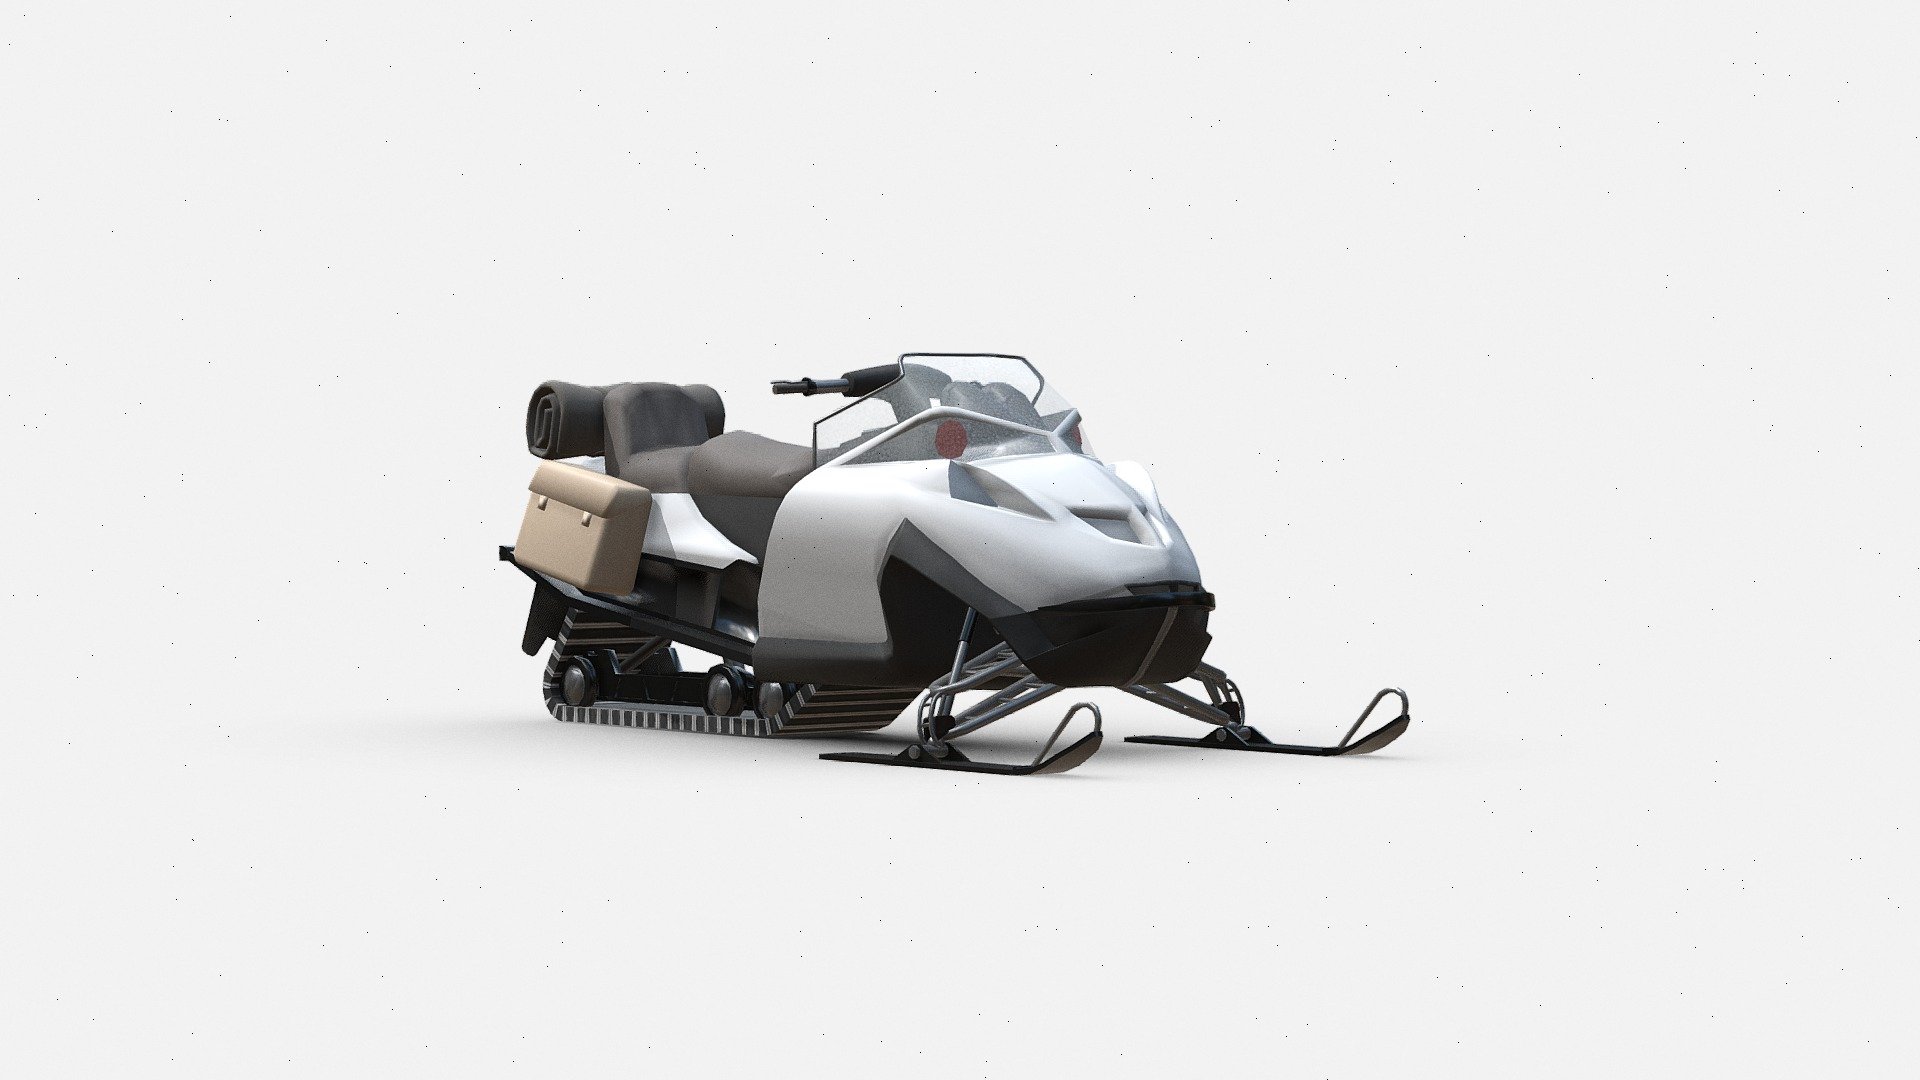 Explore the great outdoors with this detailed 3D model of a  snowmobile! Designed with precision and attention to detail, this model captures the essence of winter adventure. Whether you're creating a winter scene for a game, animation, or visualization project, this snowmobile will add a touch of realism and excitement. The model features accurately modeled components, textured surfaces, and a vibrant green color scheme that stands out against the snowy landscapes. Get ready to bring your winter-themed projects to life with this versatile 3D asset! - 3d model Snowmobile Green - Buy Royalty Free 3D model by zizian 3d model